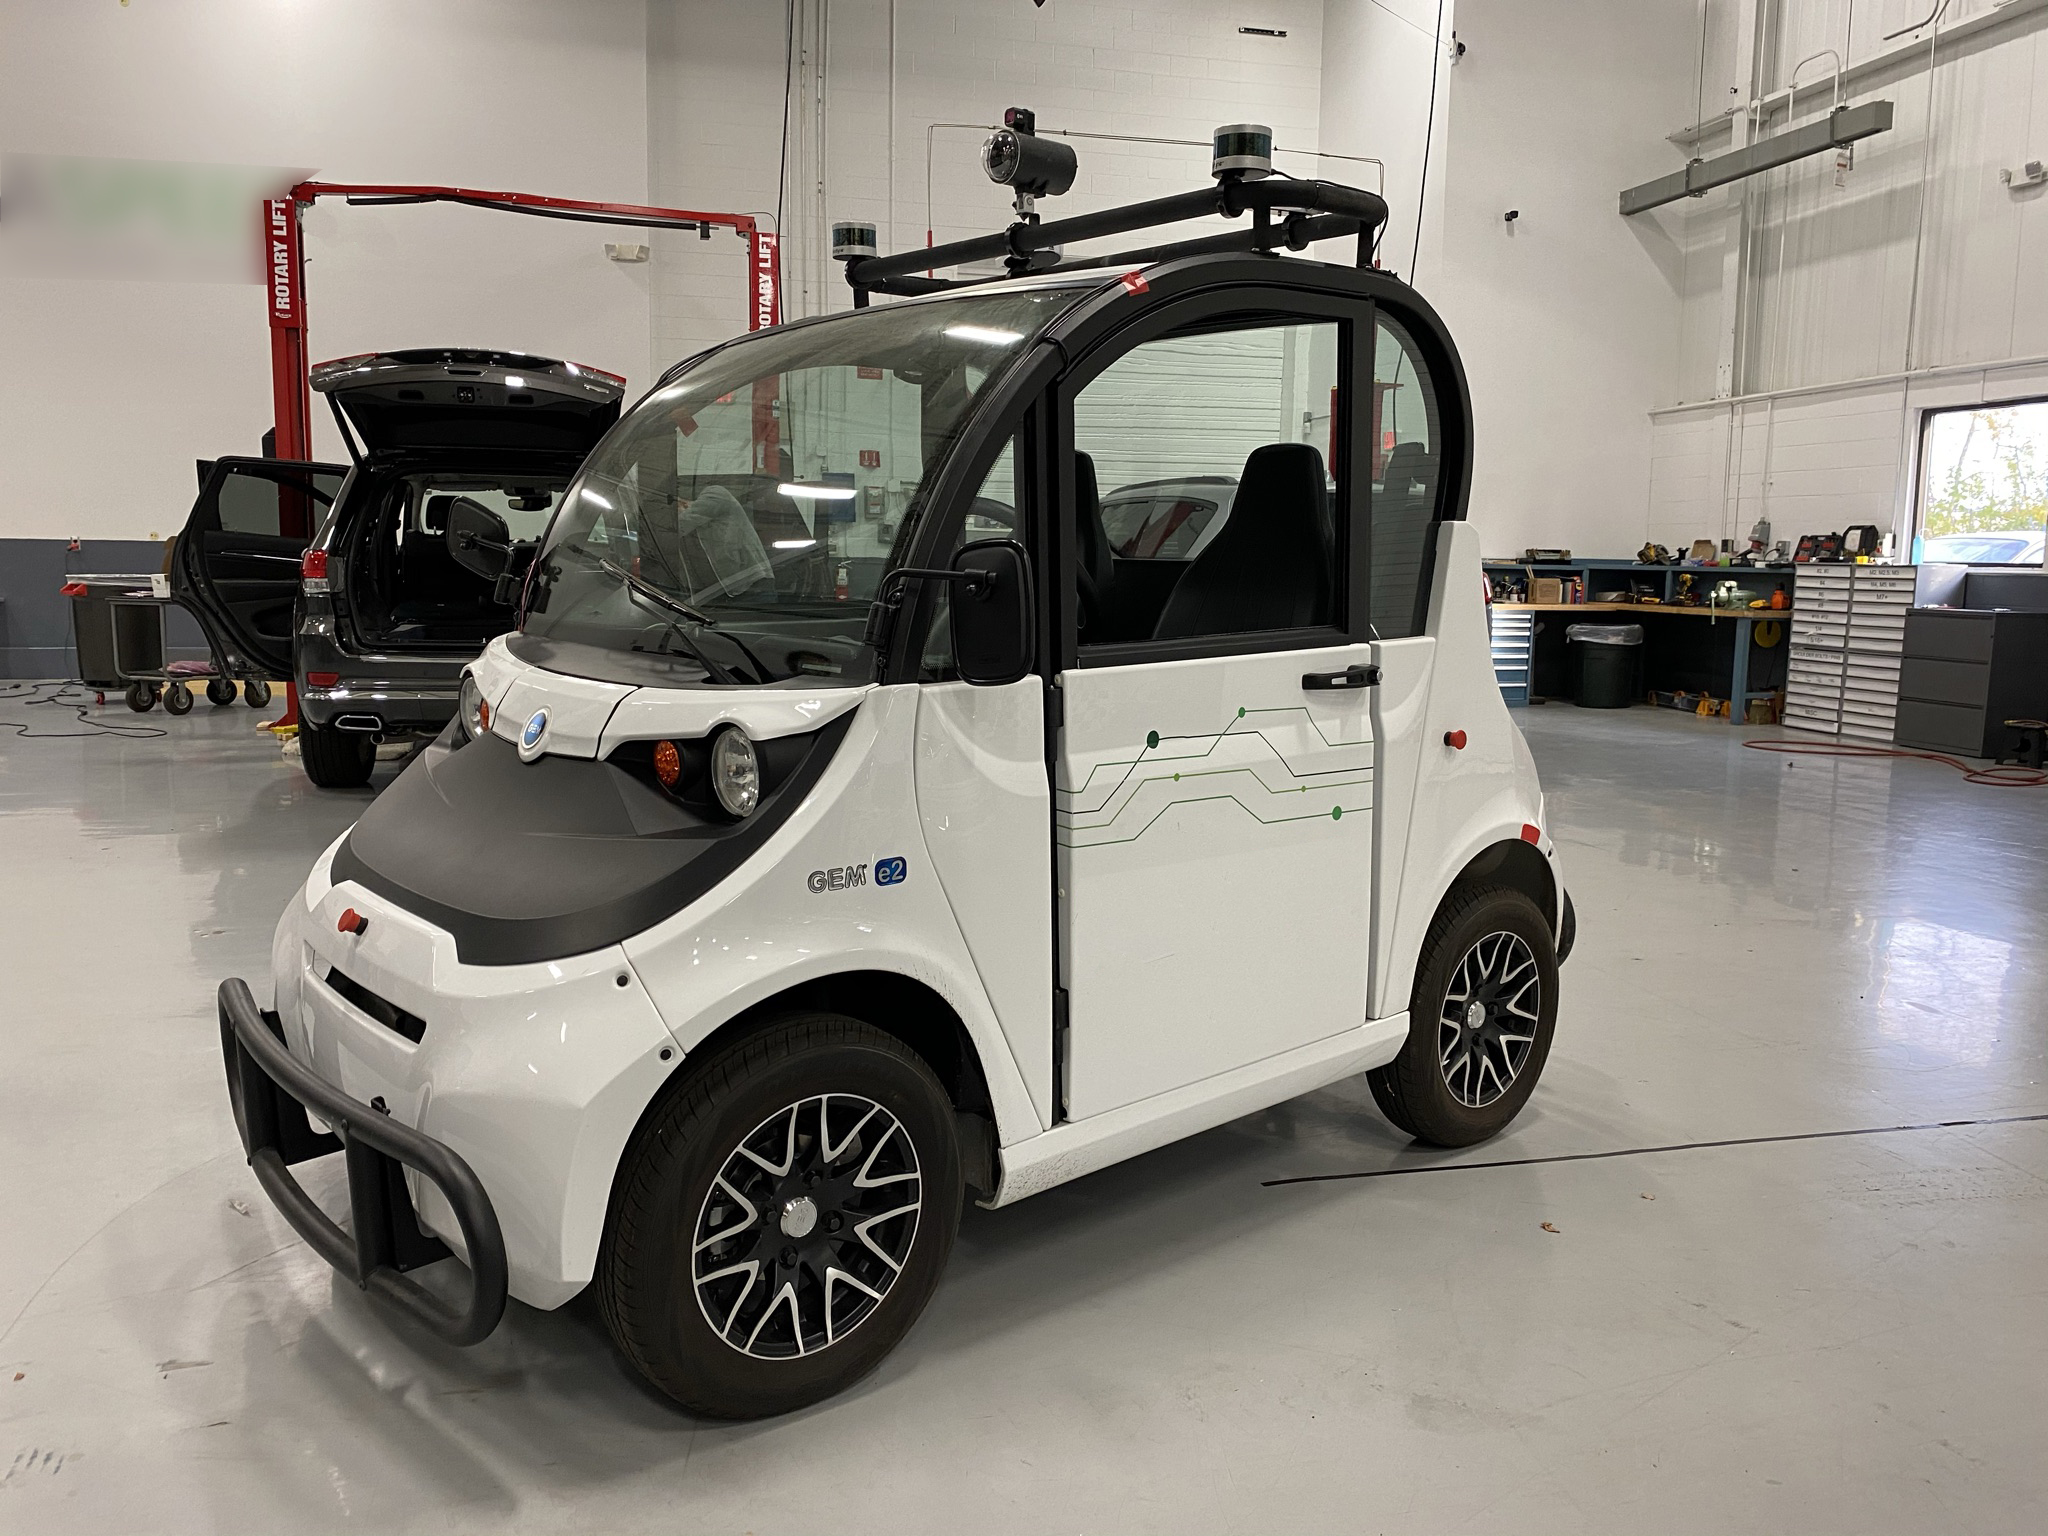 This new smart lab is working on self-parking cars